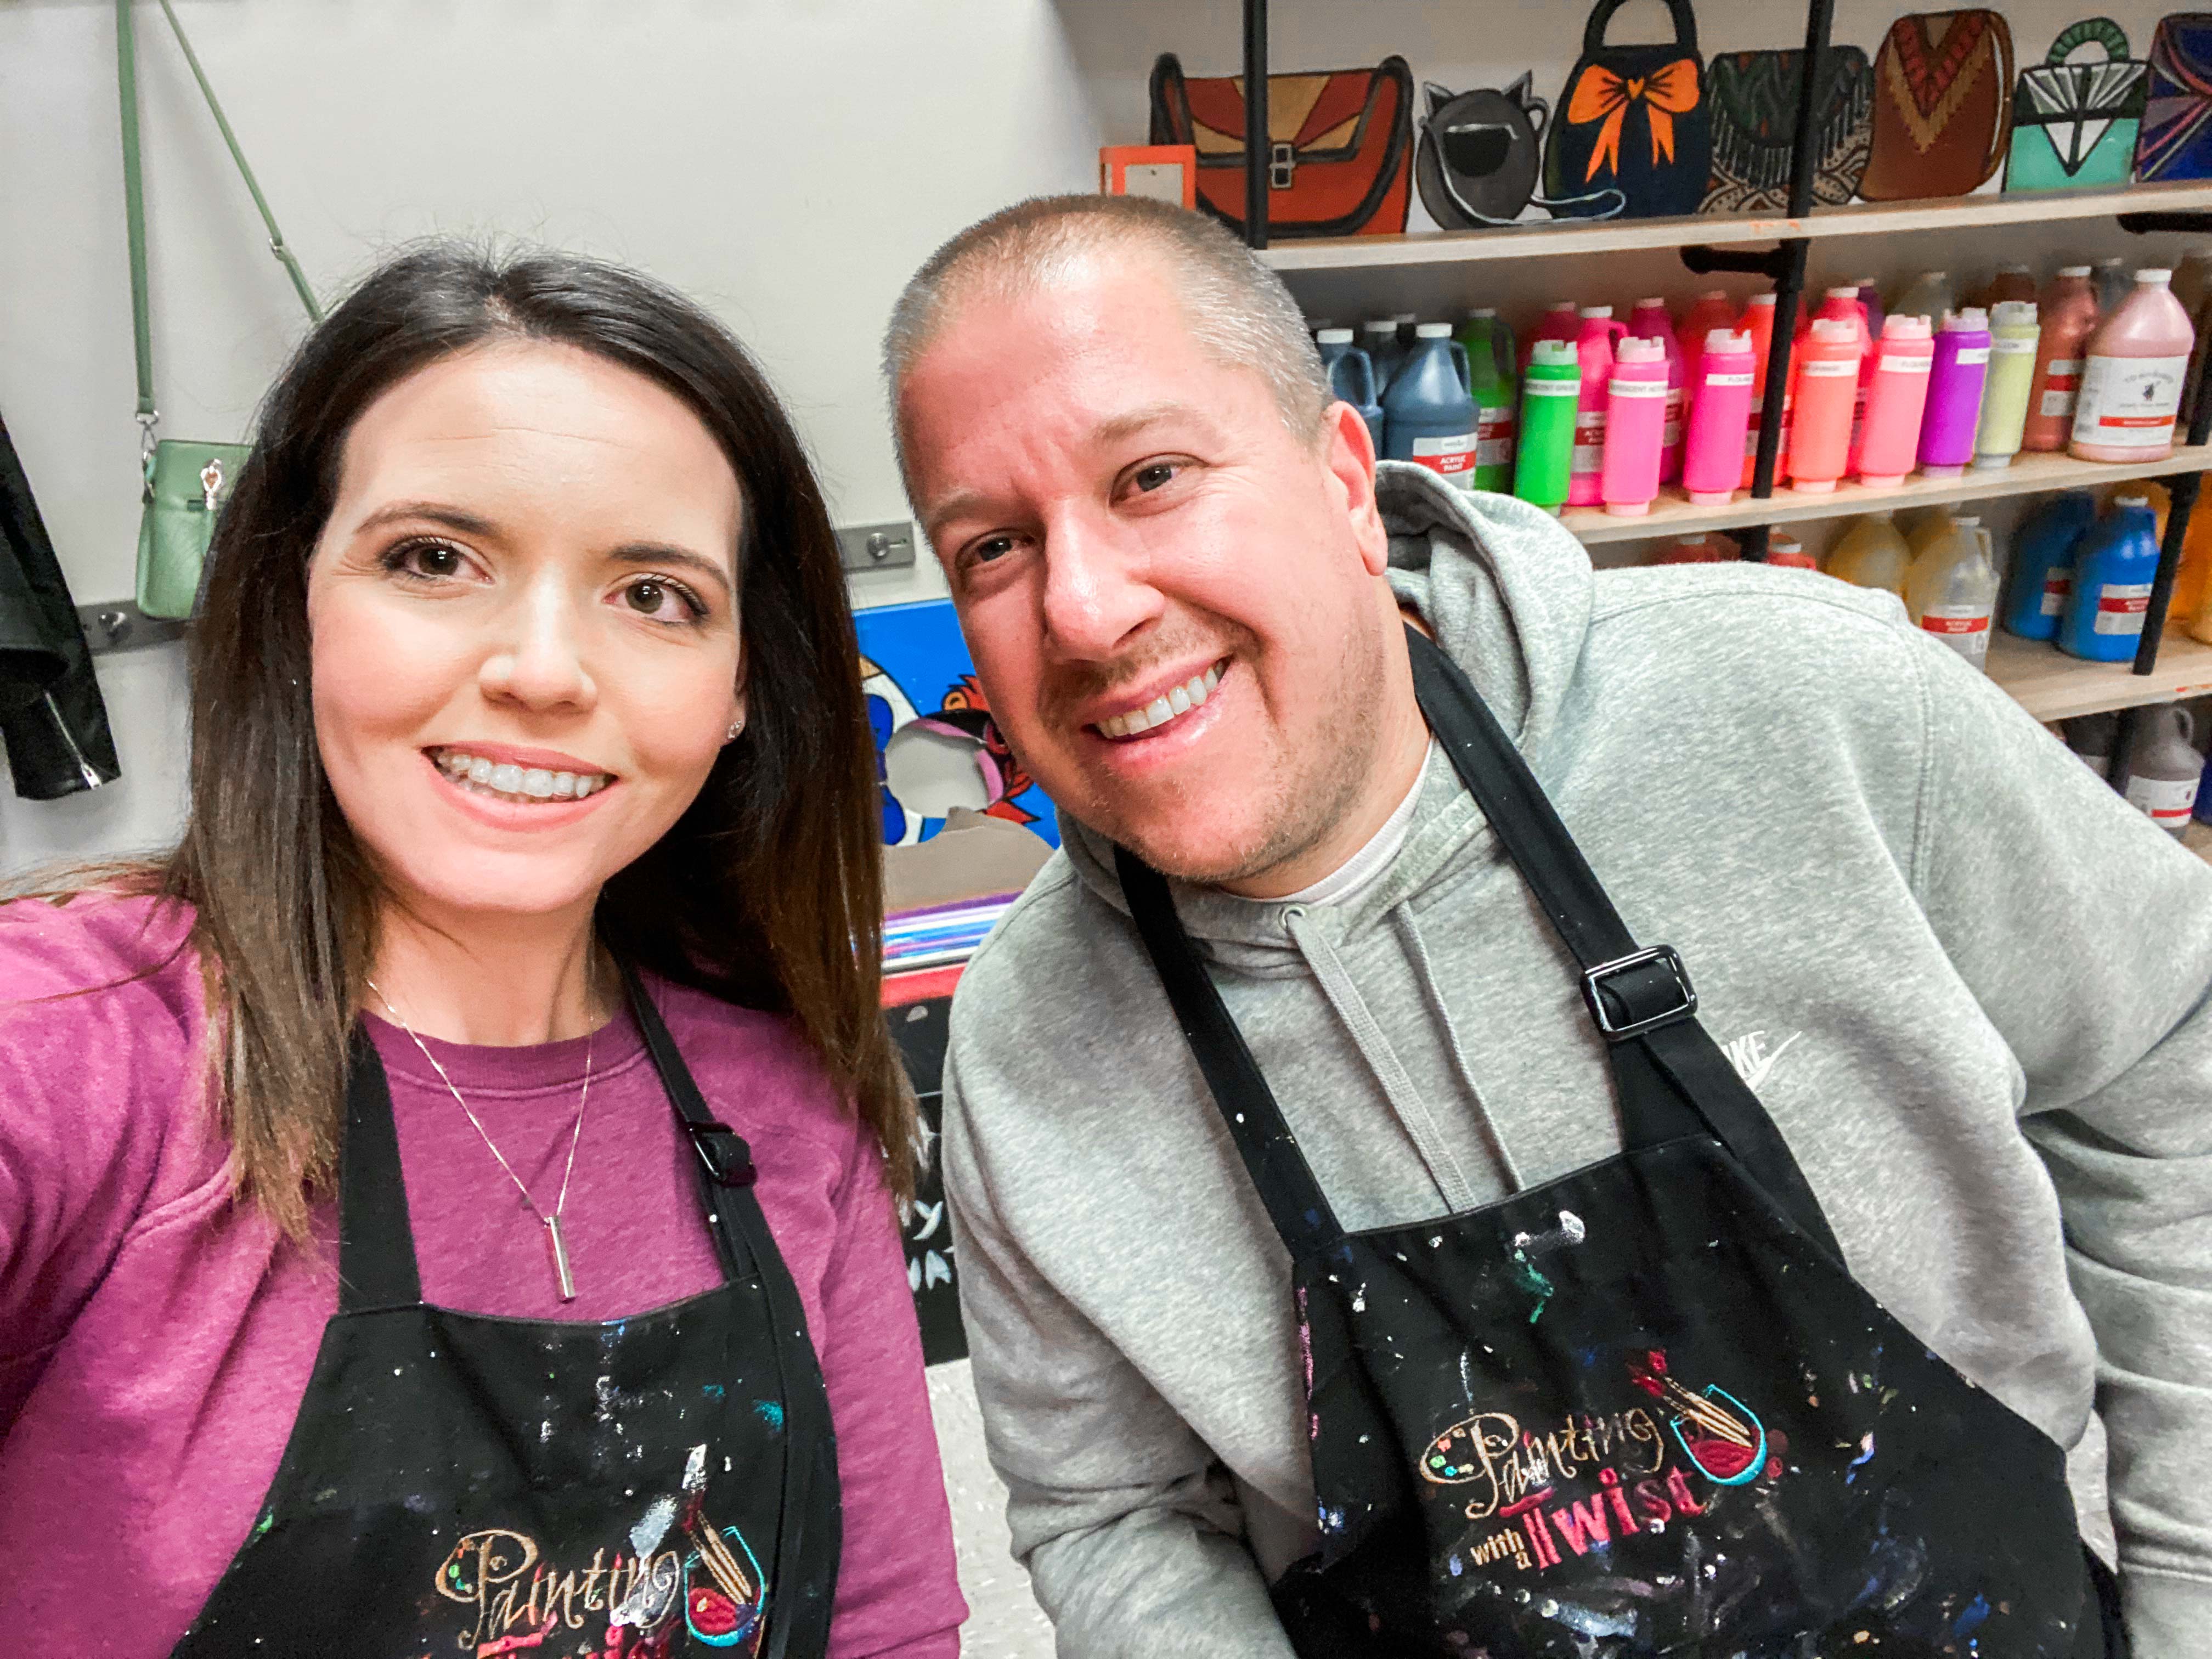 Husband and Wife take selfie at Painting with a Twist class.